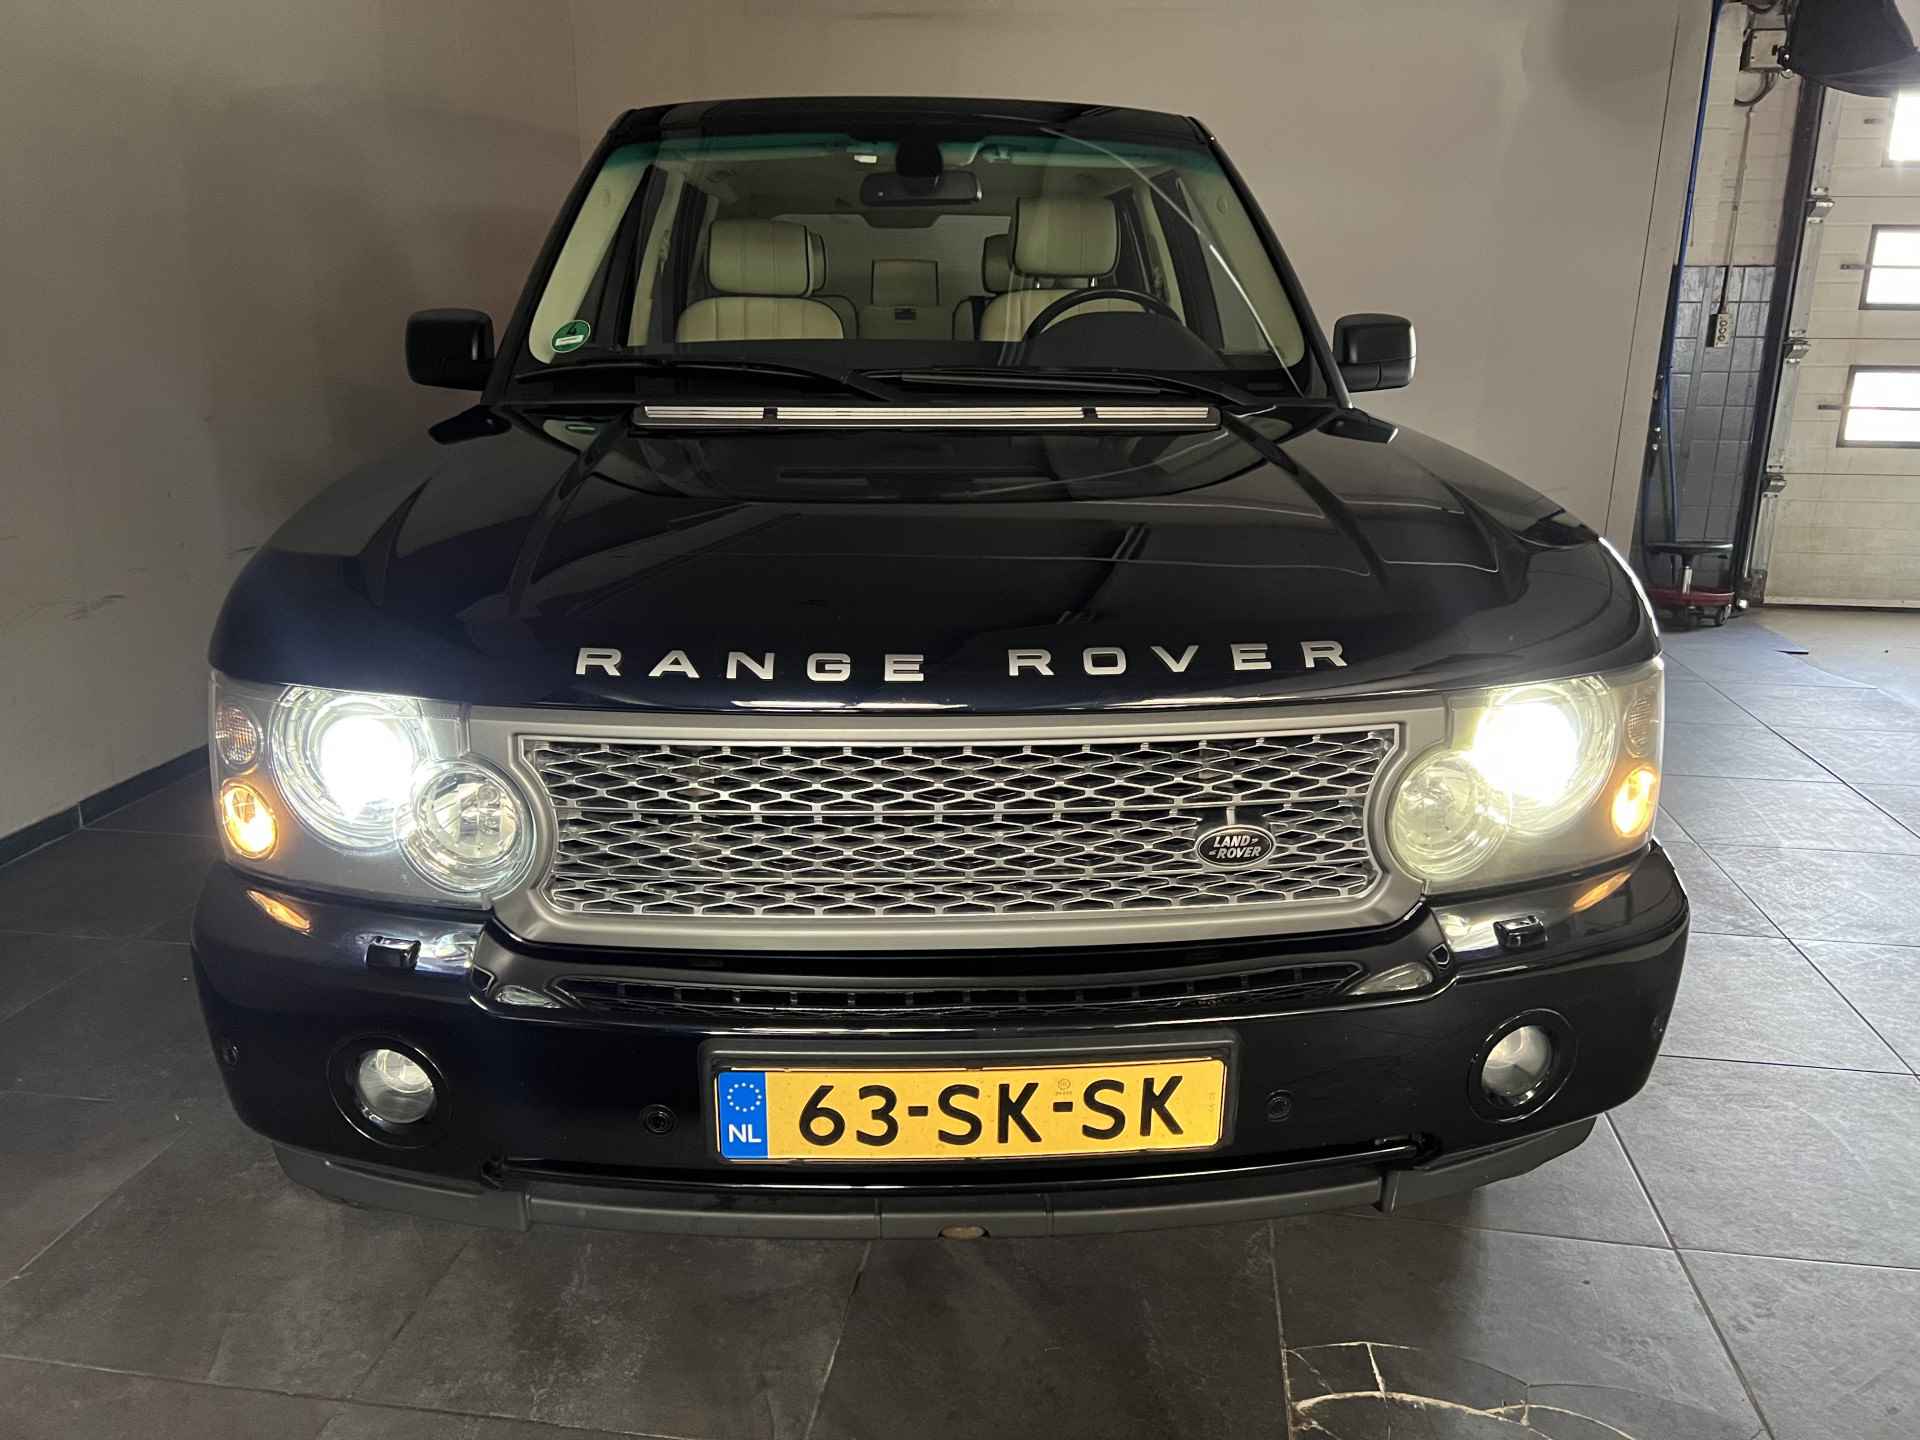 Land Rover Range Rover 4.2 V8 Supercharged ✅UNIEKE STAAT✅Airco✅Cruise controle✅Navigatie✅5 deurs✅TREKHAAK - 7/52